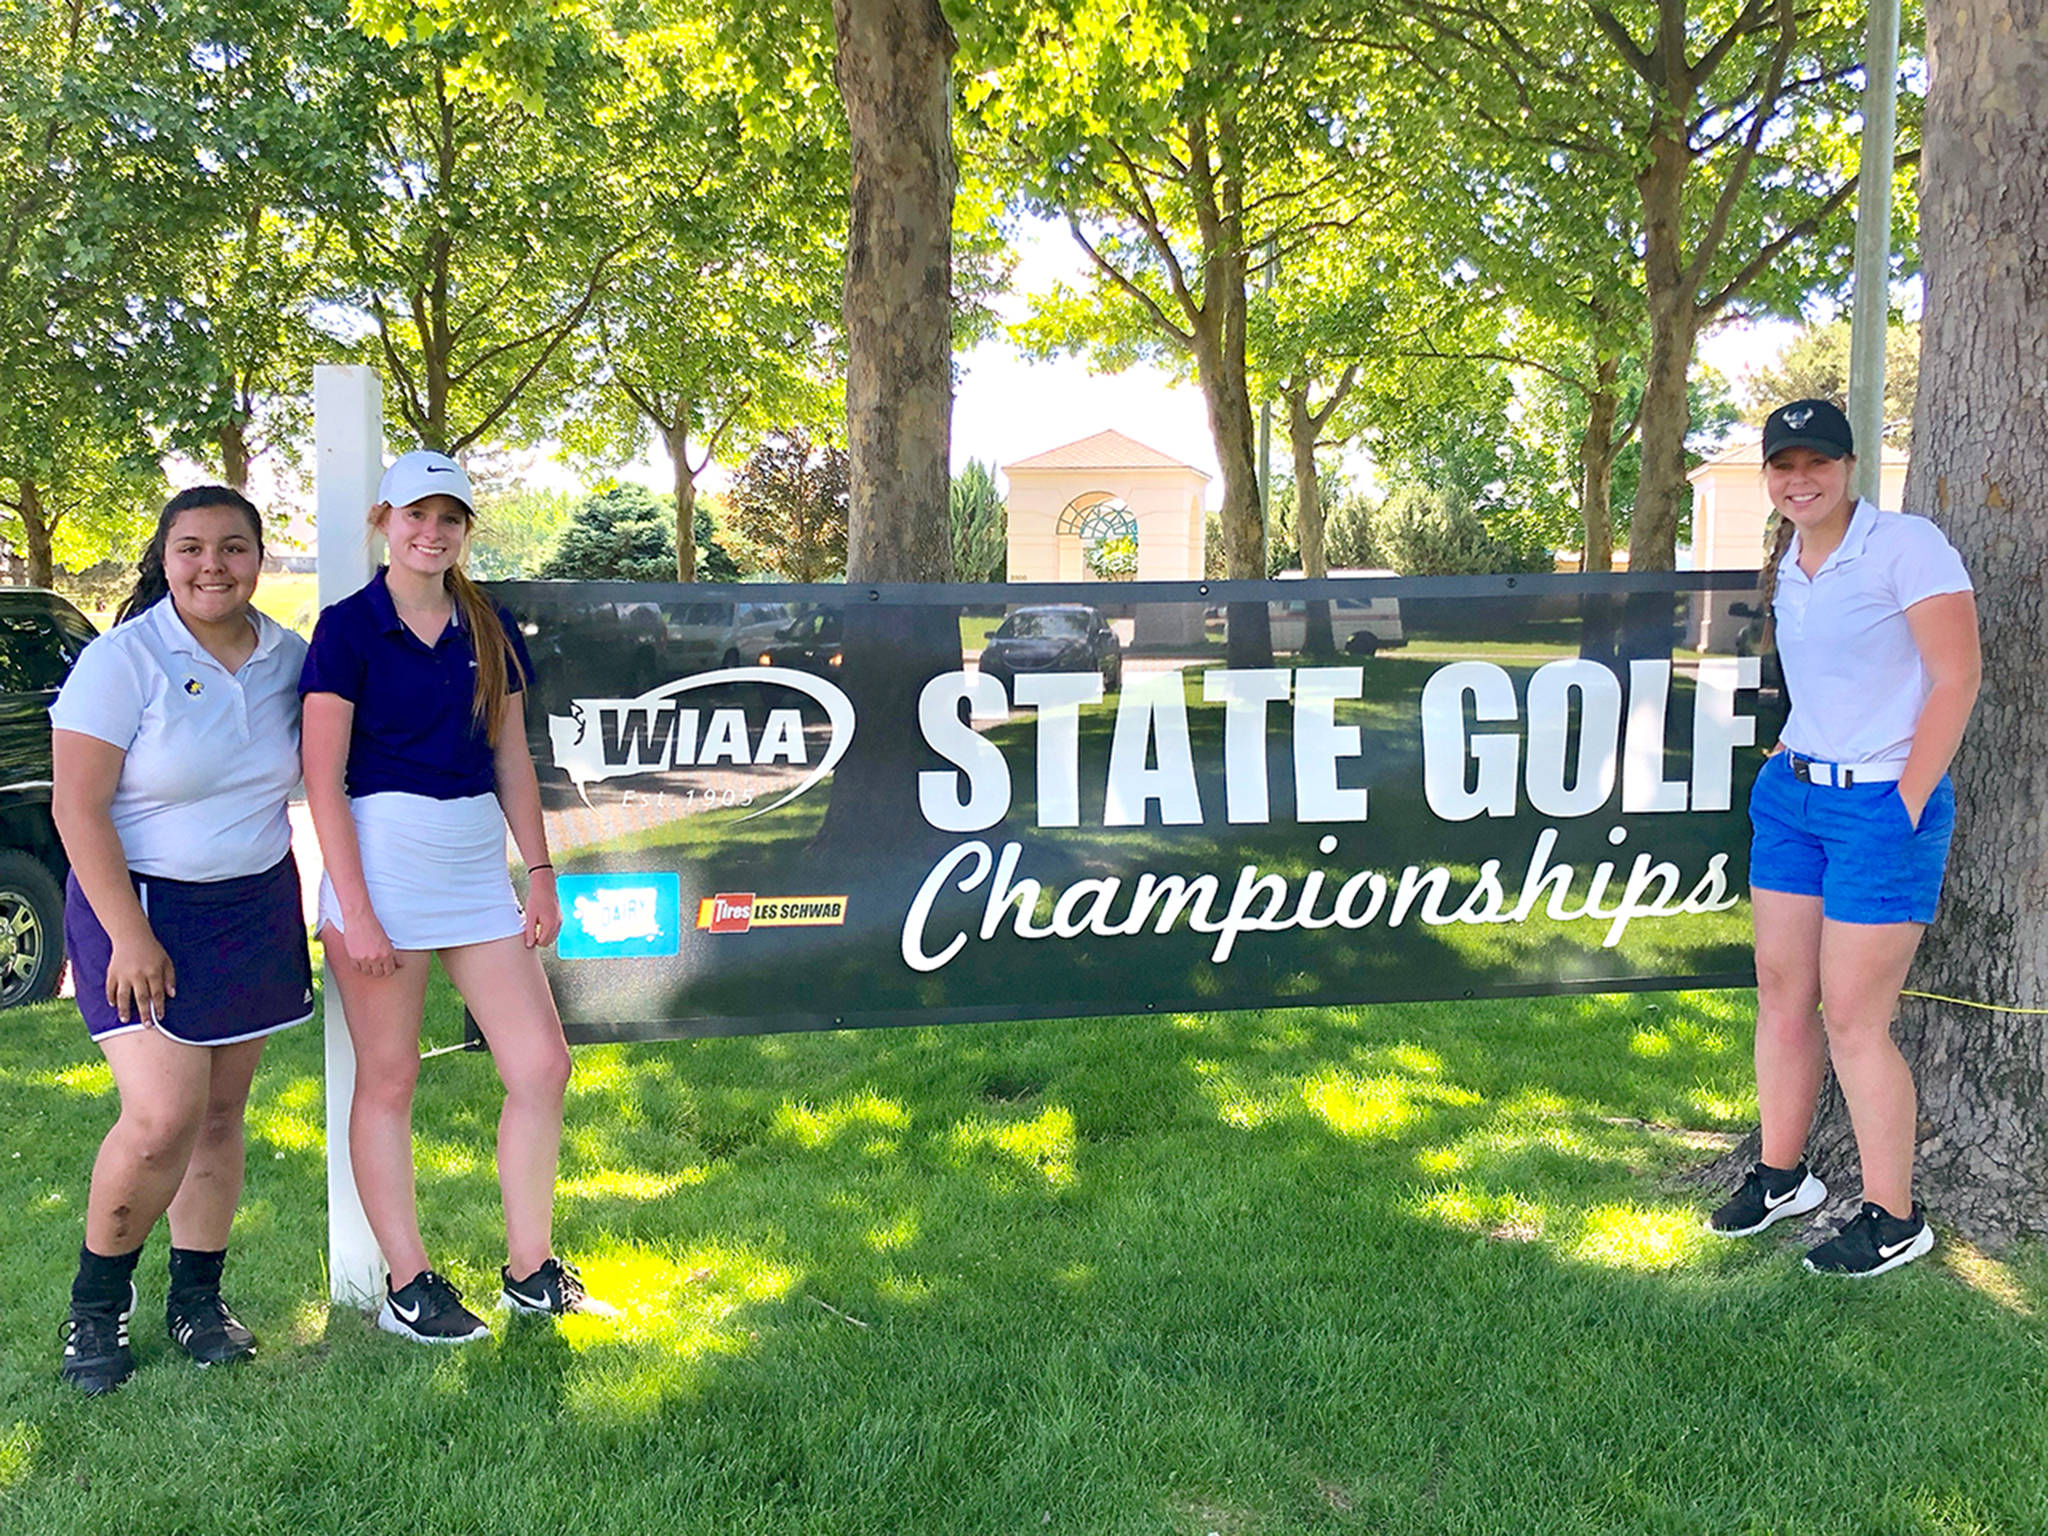 GOLF: Local golfers made their mark at state